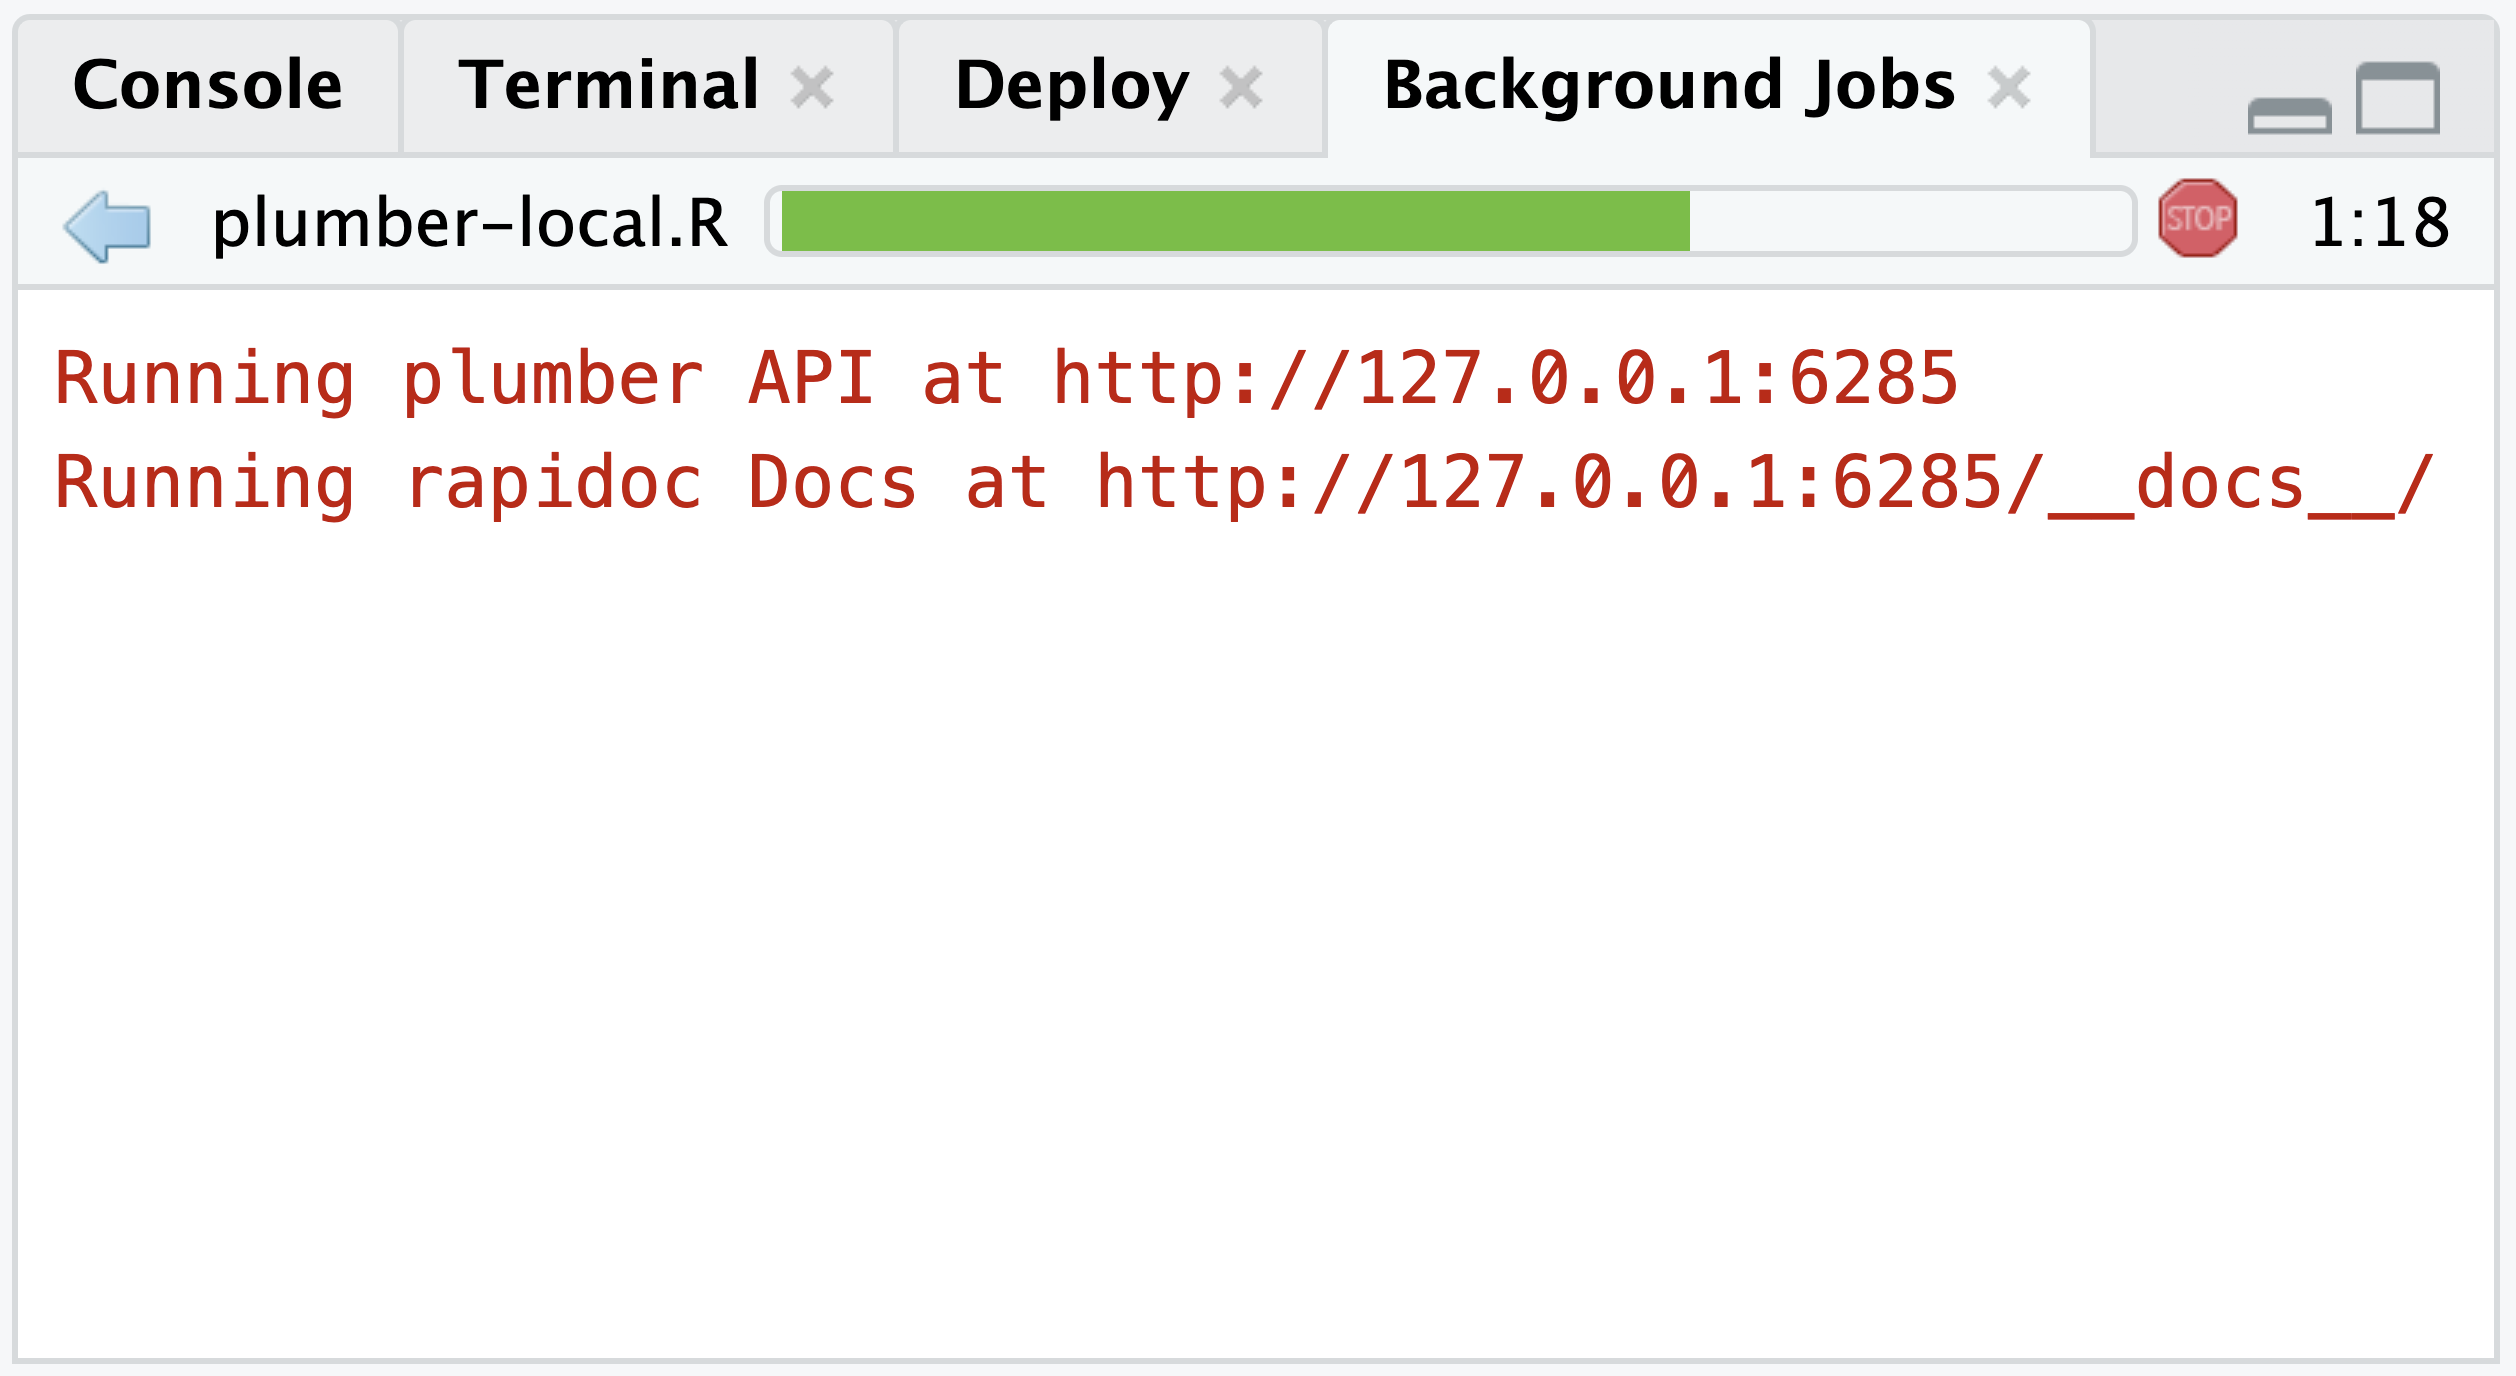 A screenshot of the Background Jobs pane, displaying the example URL to the API and the rapidoc docs.